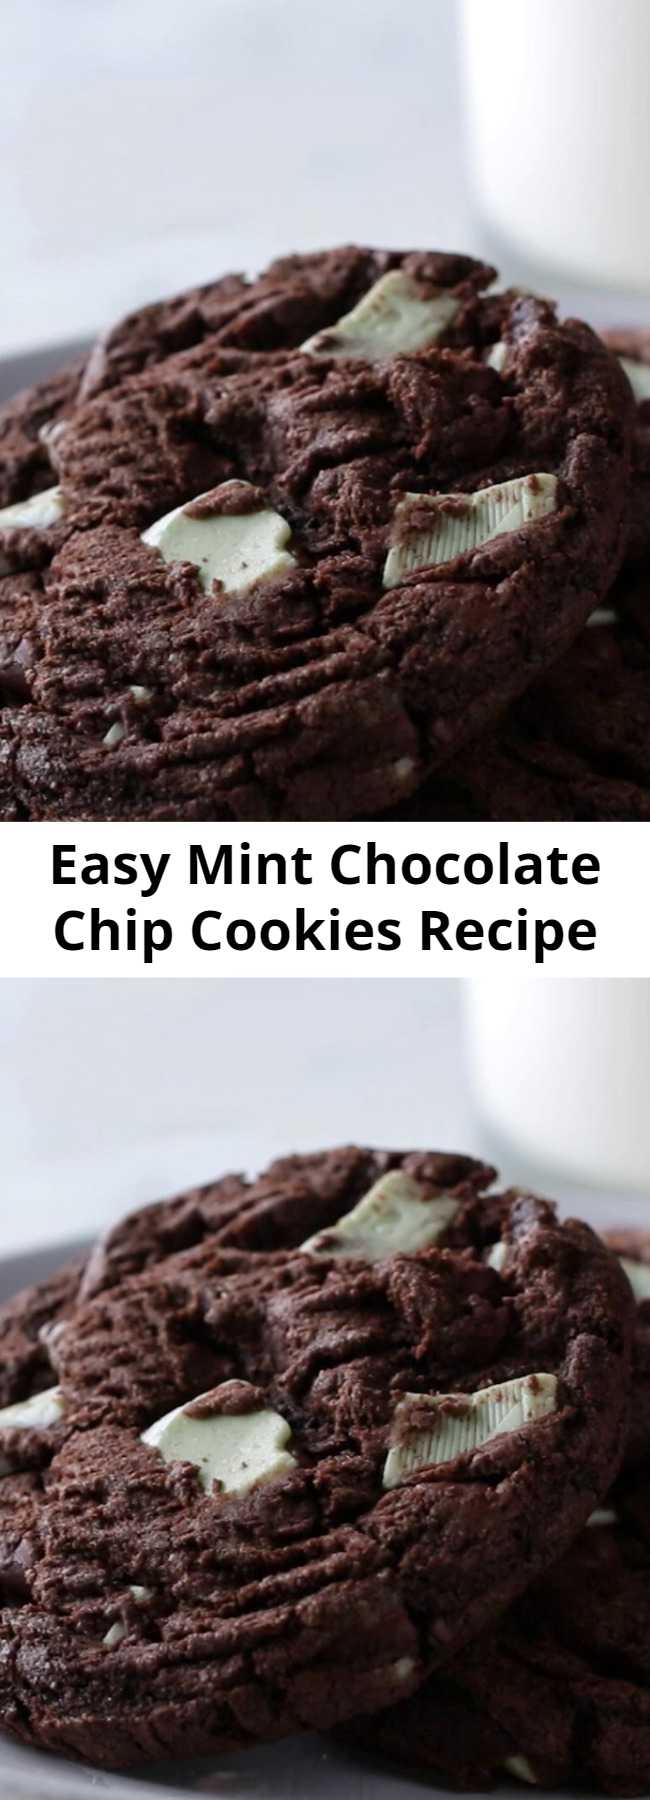 Easy Mint Chocolate Chip Cookies Recipe - Extremely Delicious!! Fun and easy to make too.